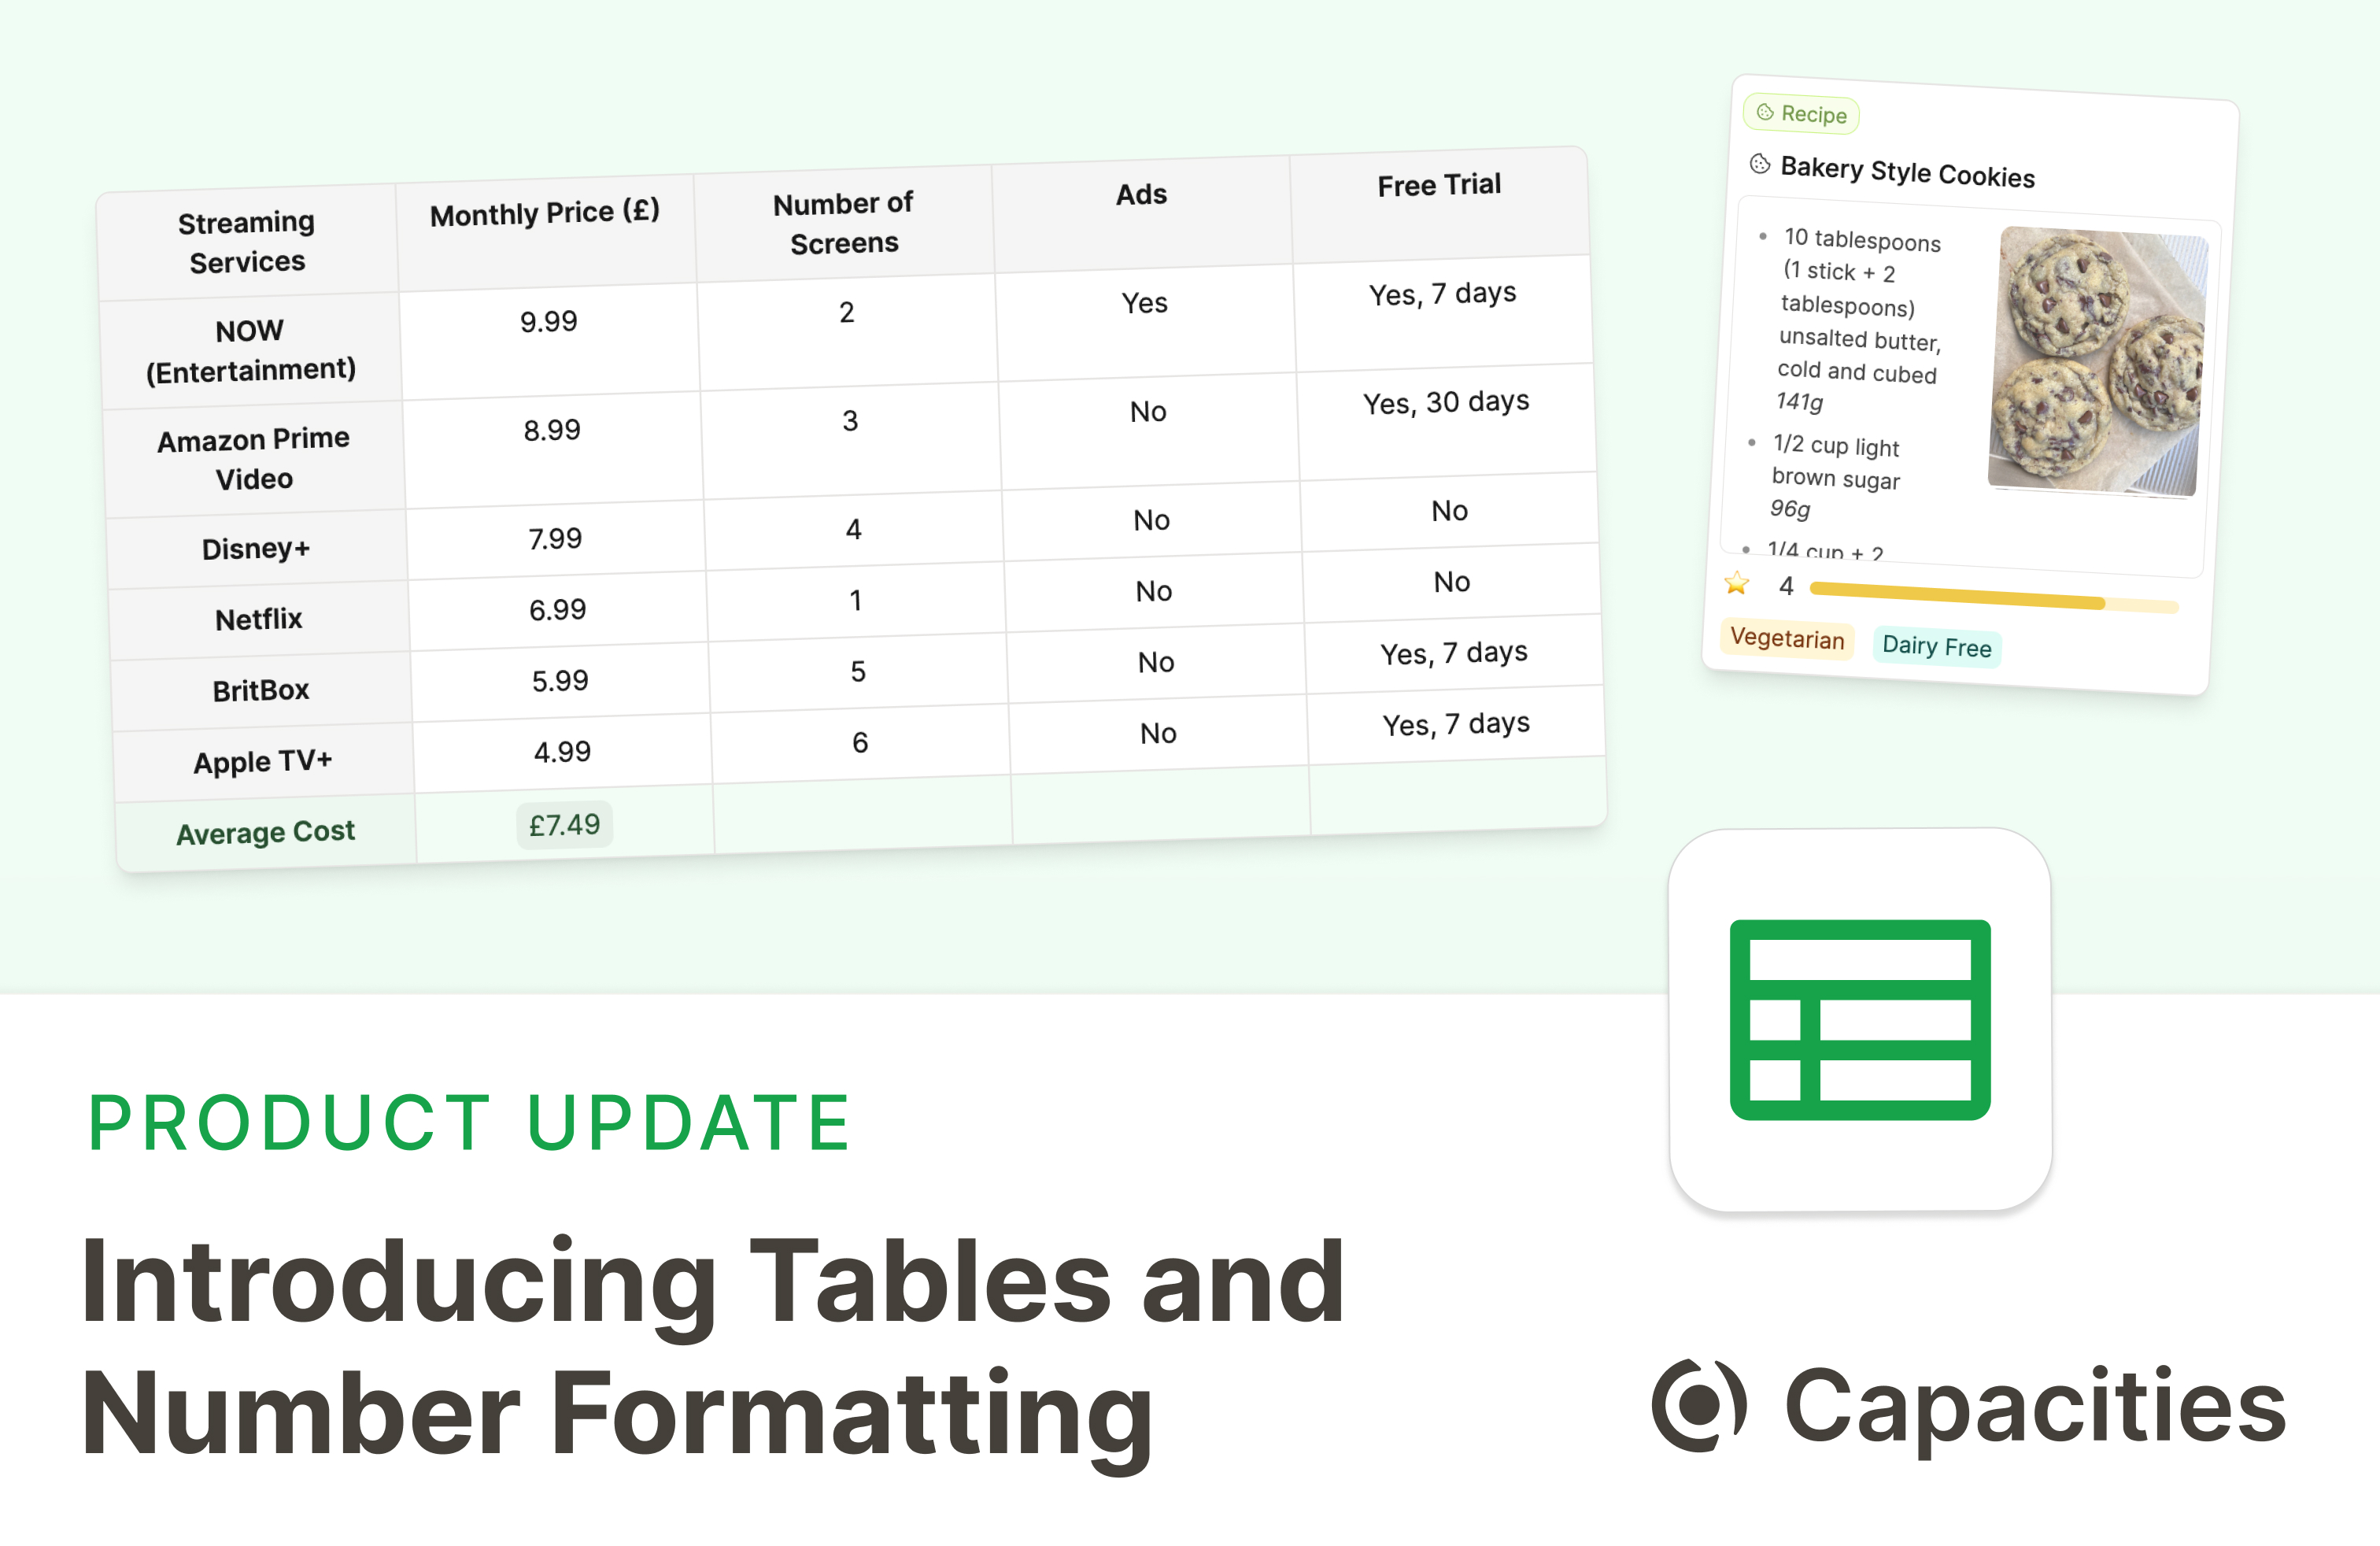 Introducing Tables and Number Formatting